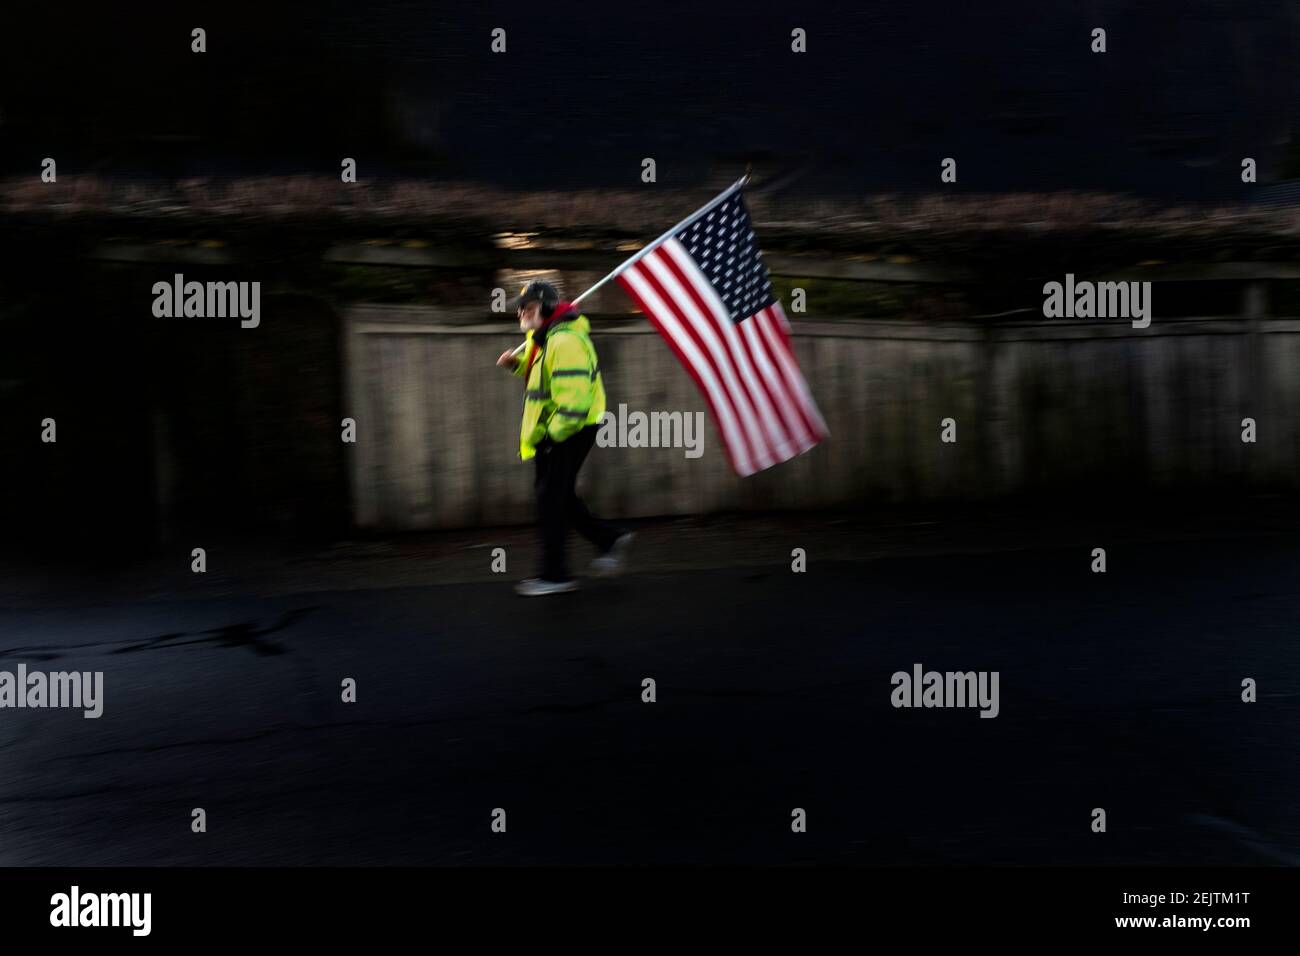 WA20099-00..... Washington, - Vietnam veteran MIKE REAGAN walks the streets with an American Flag. Mike takes his daily walk with the flag. Stock Photo